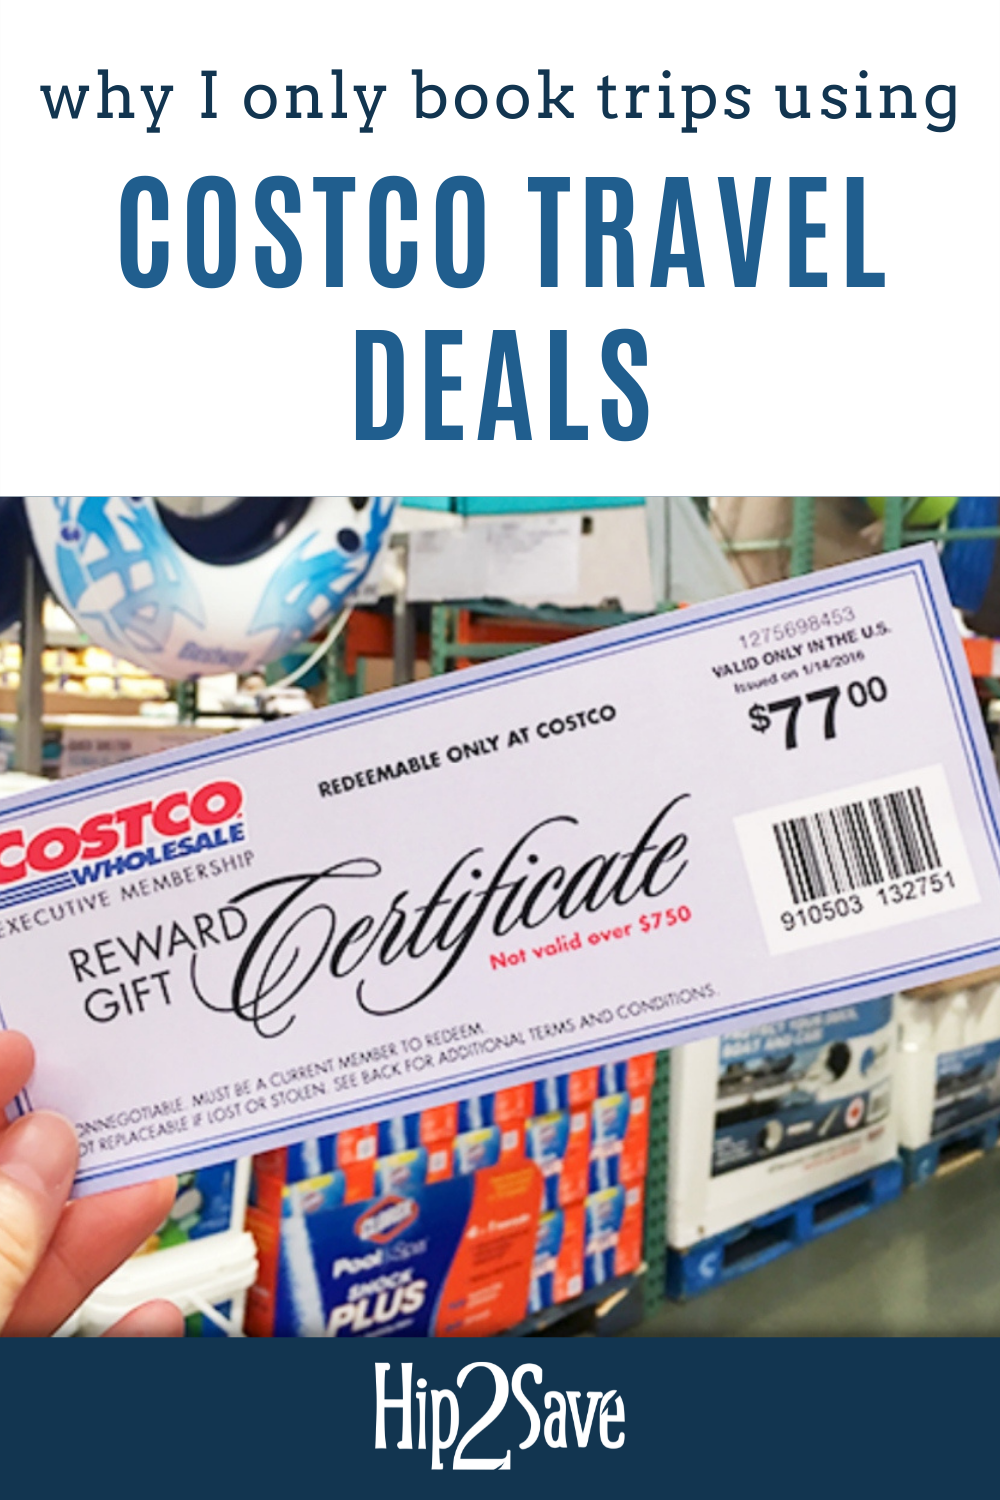 How Does Costco Travel Work? (Plus Insider Tips to Save BIG)